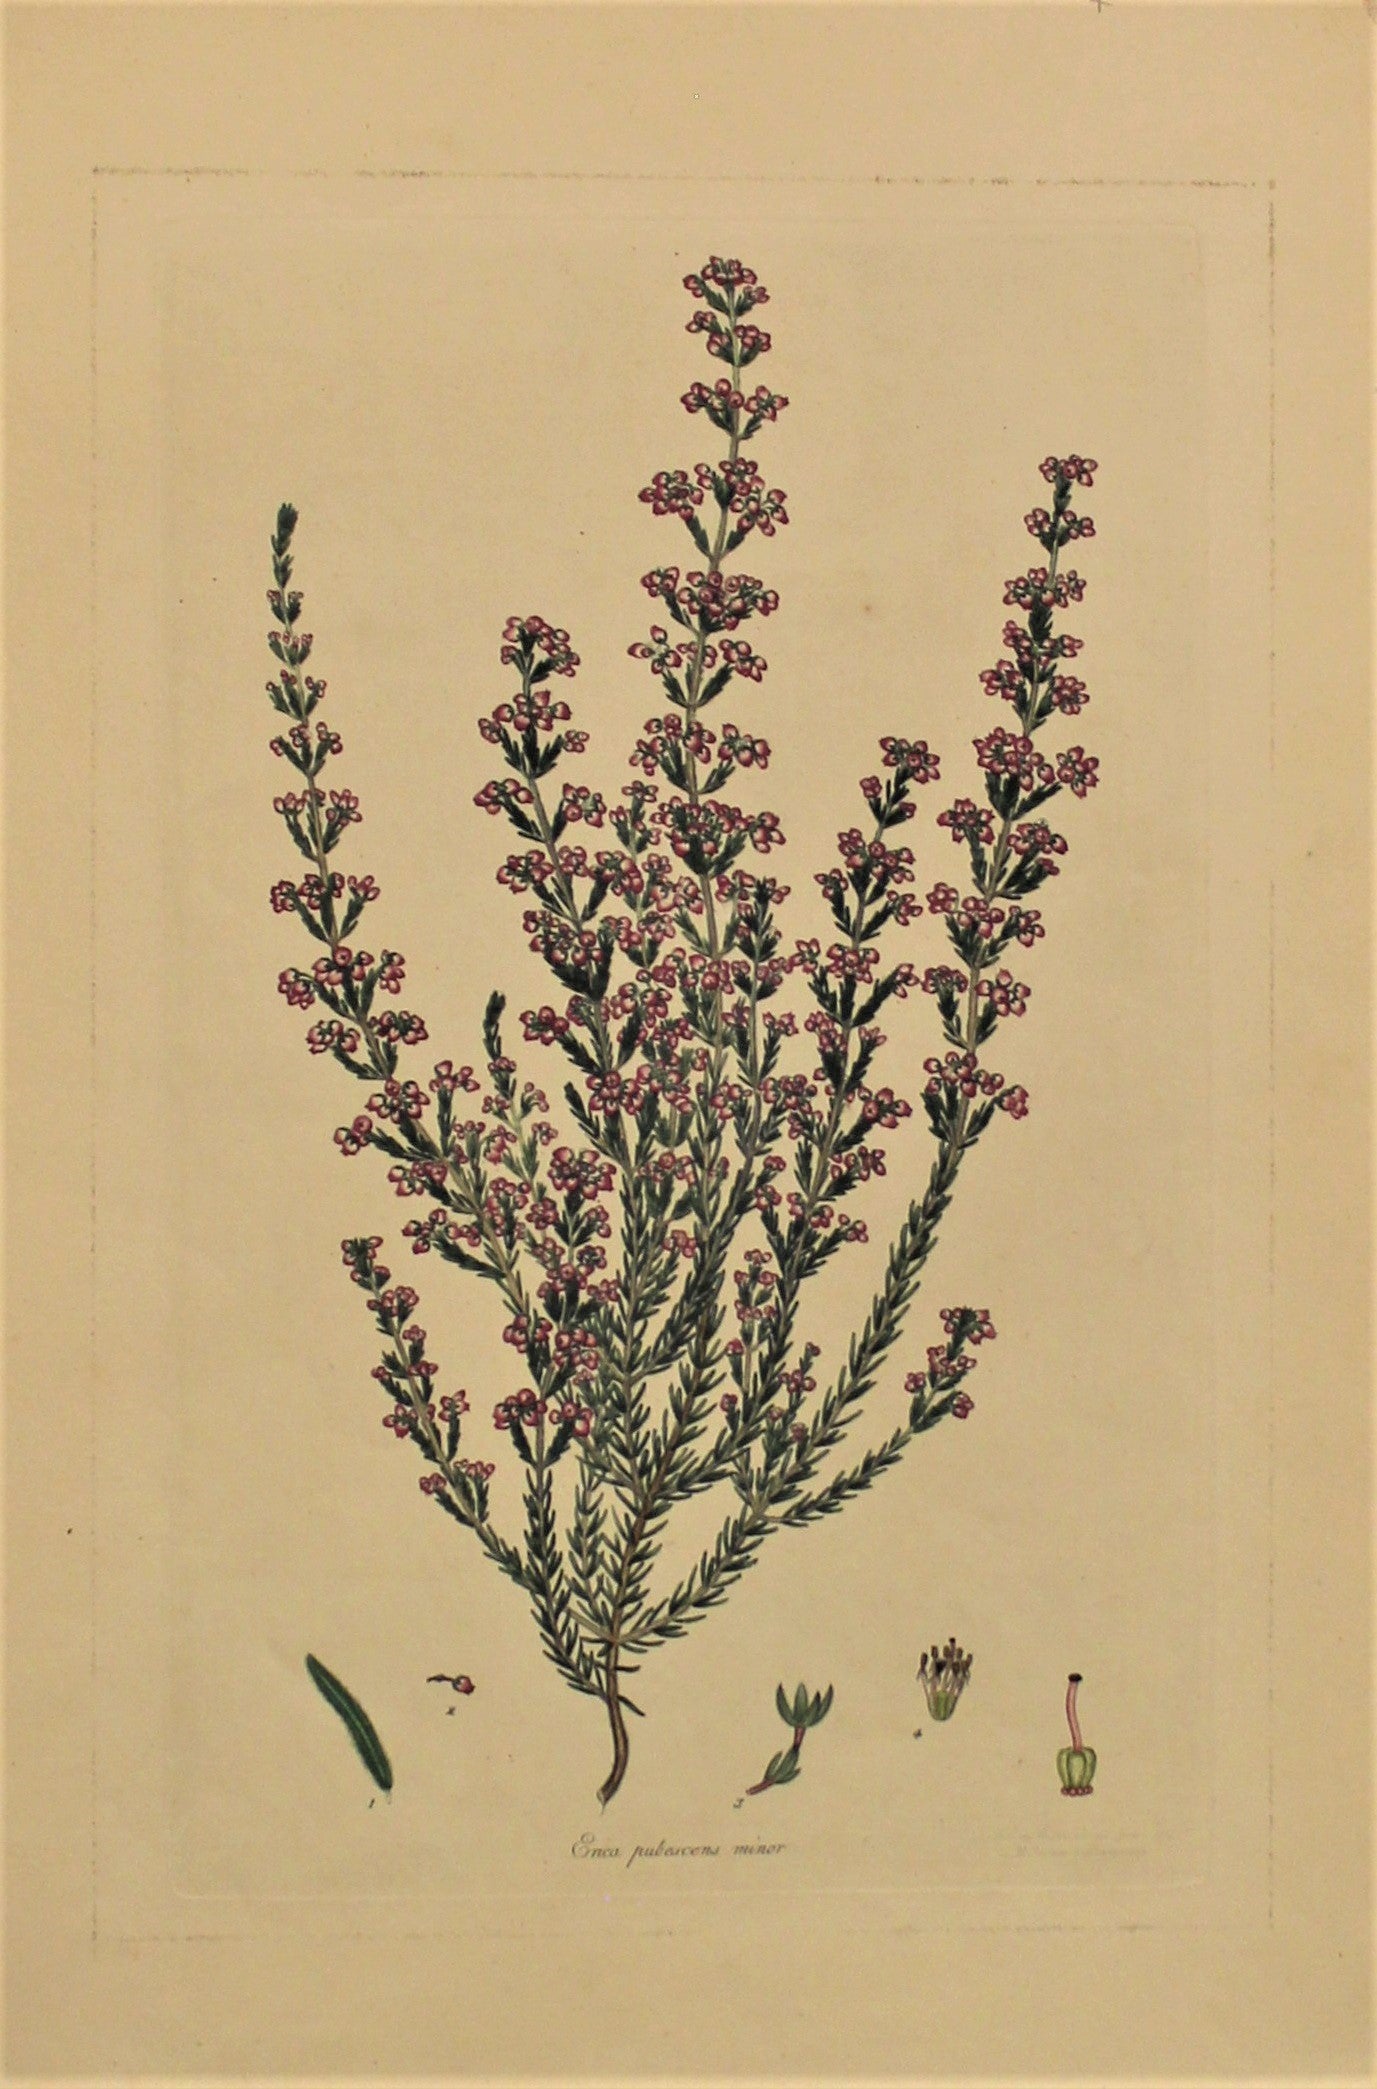 Botanical, Andrews Henry, Erica Pubescens, Copperplate Engraving,1797